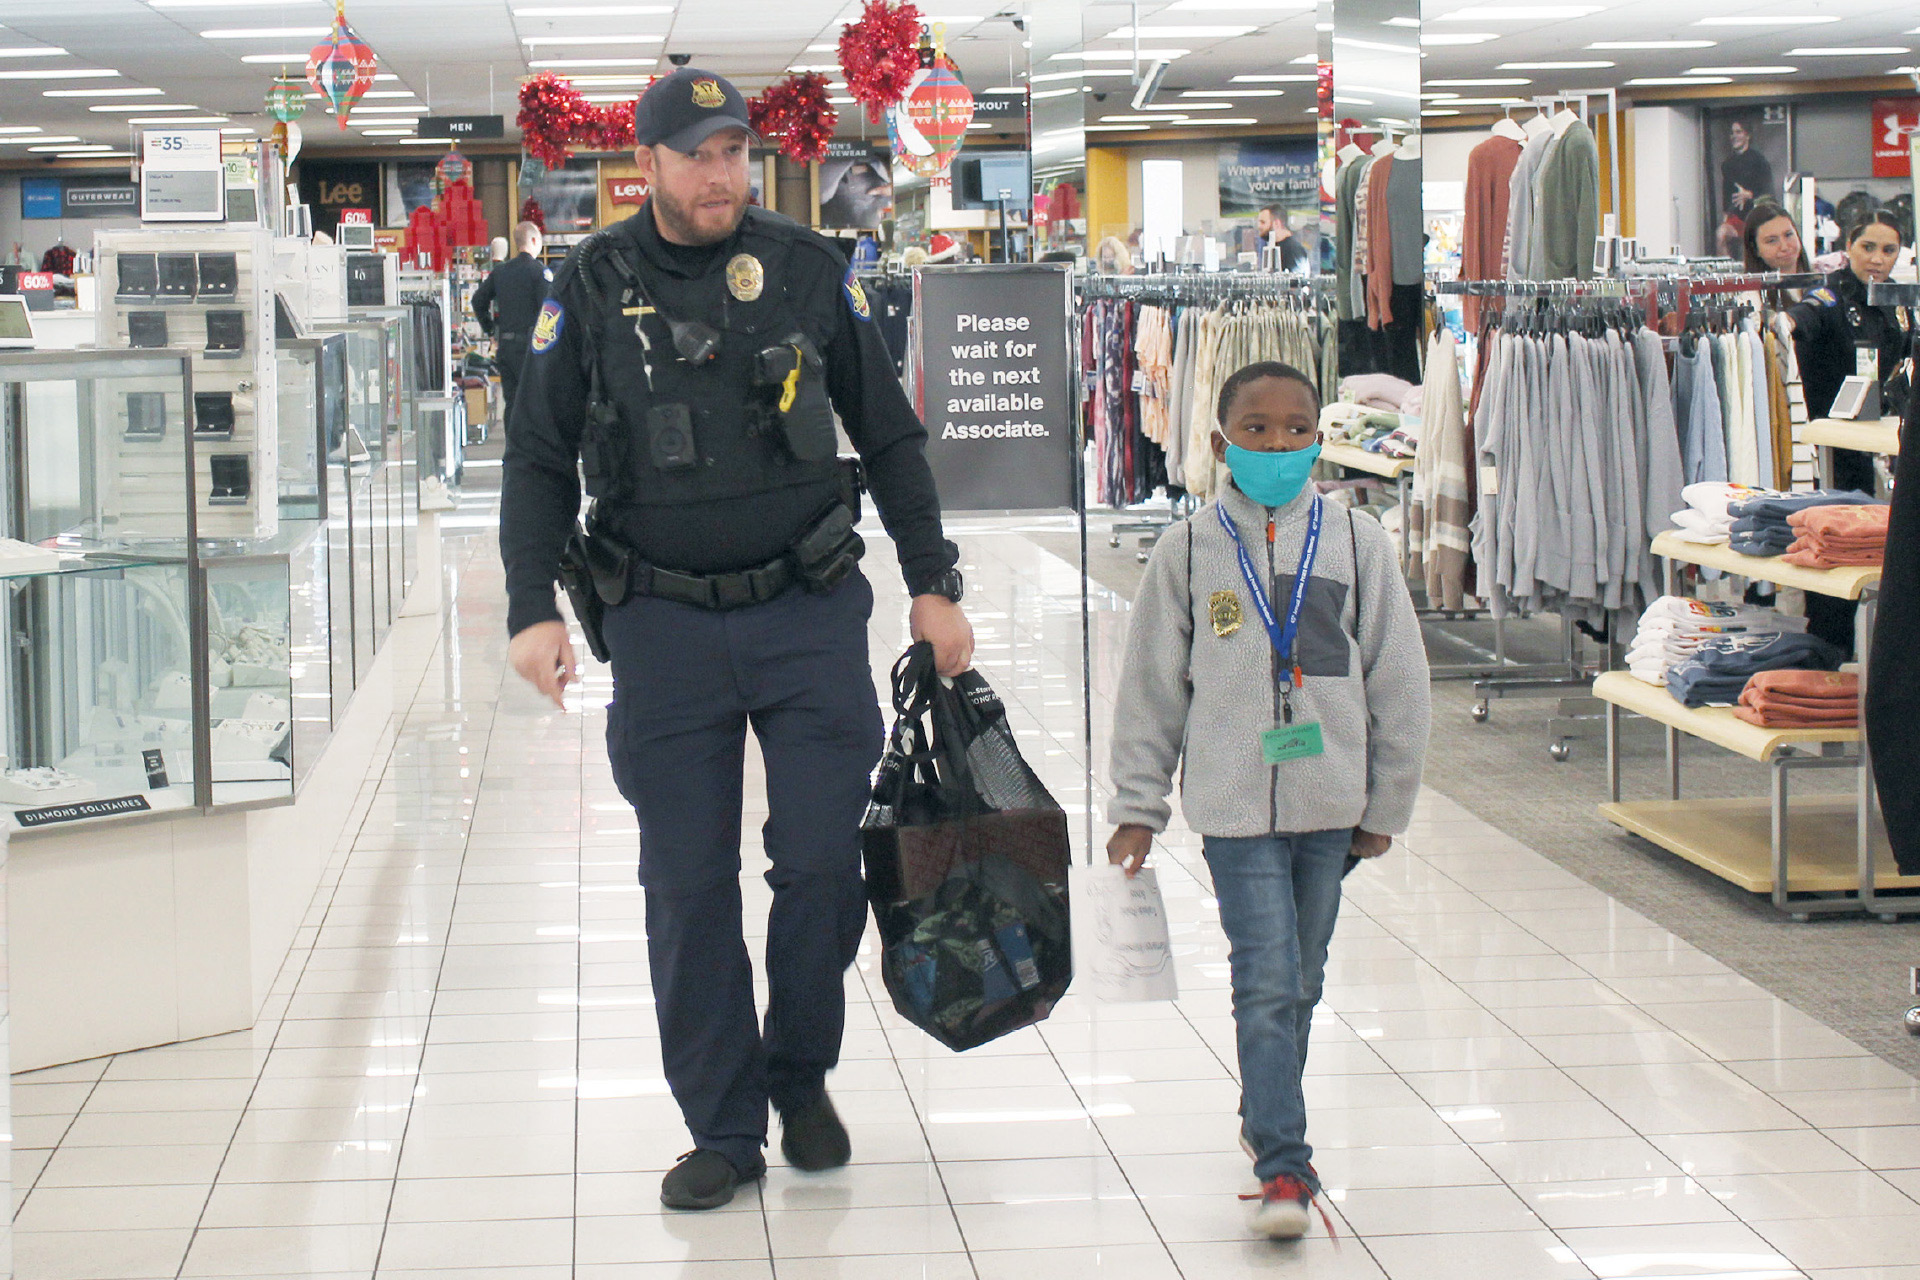 11th-annual-shop-with-a-cop-14